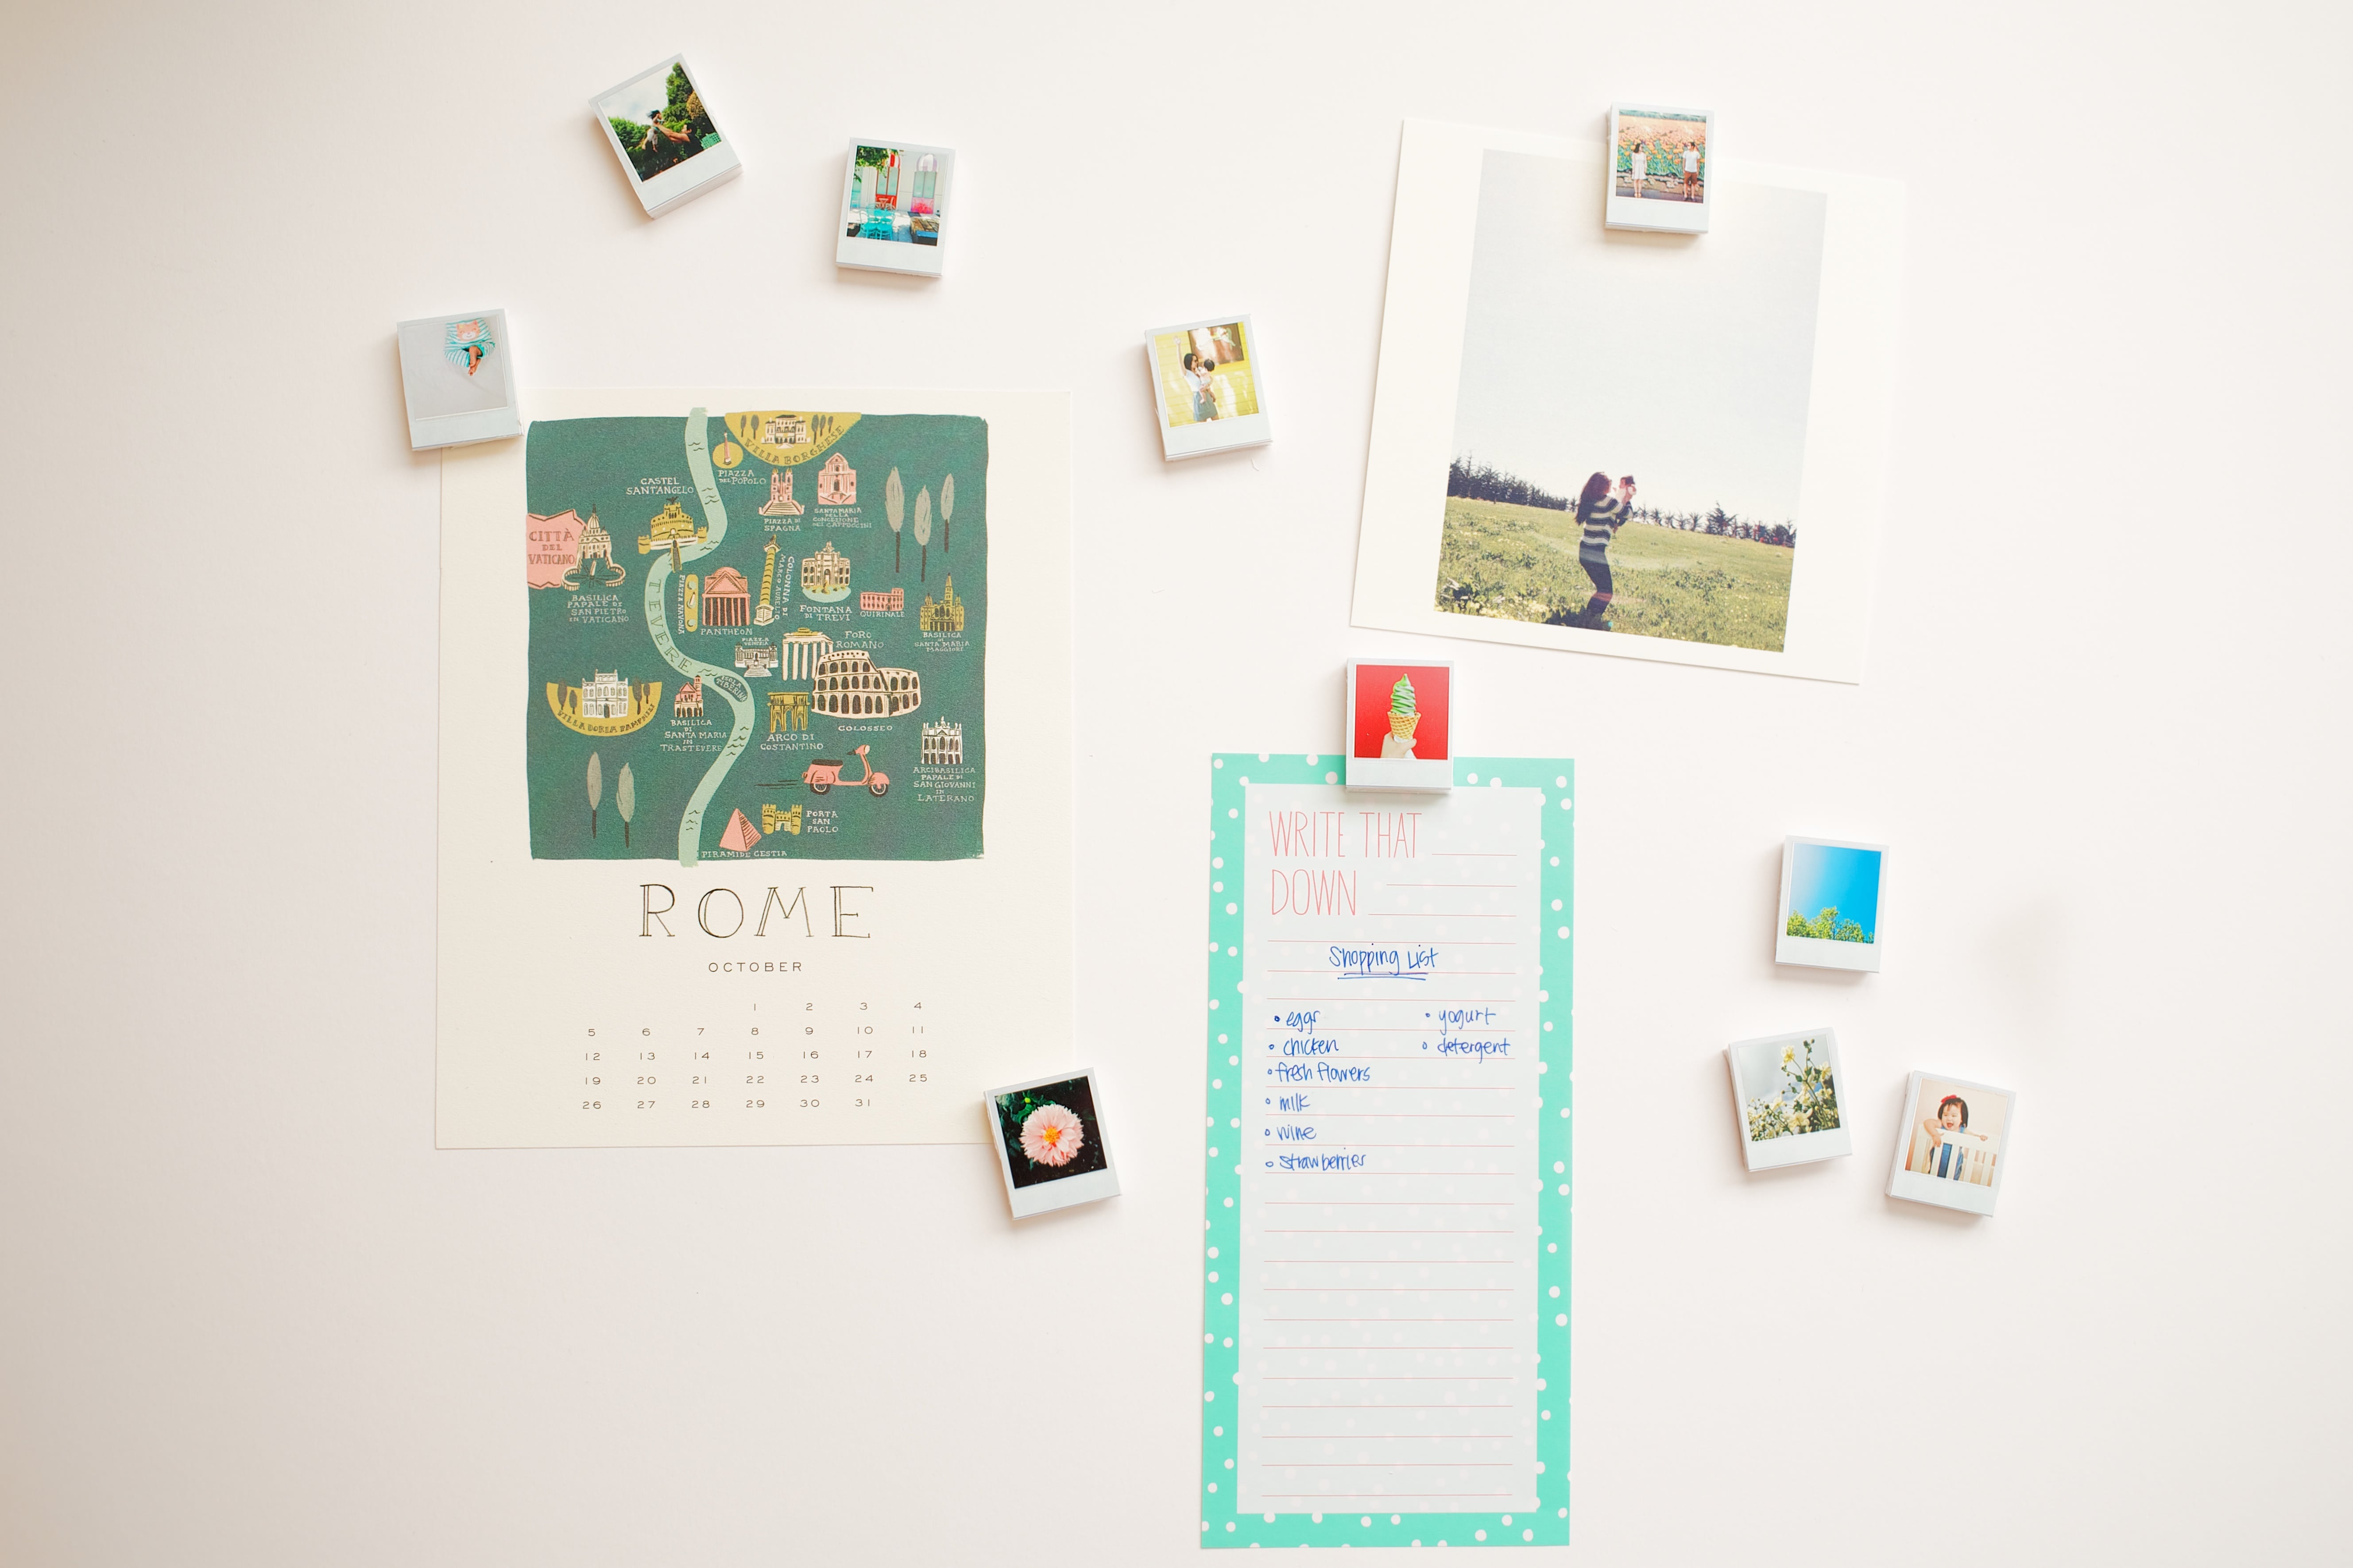 DIY Instagram Photo Magnets: An Easy Tutorial to Make Picture Magnets